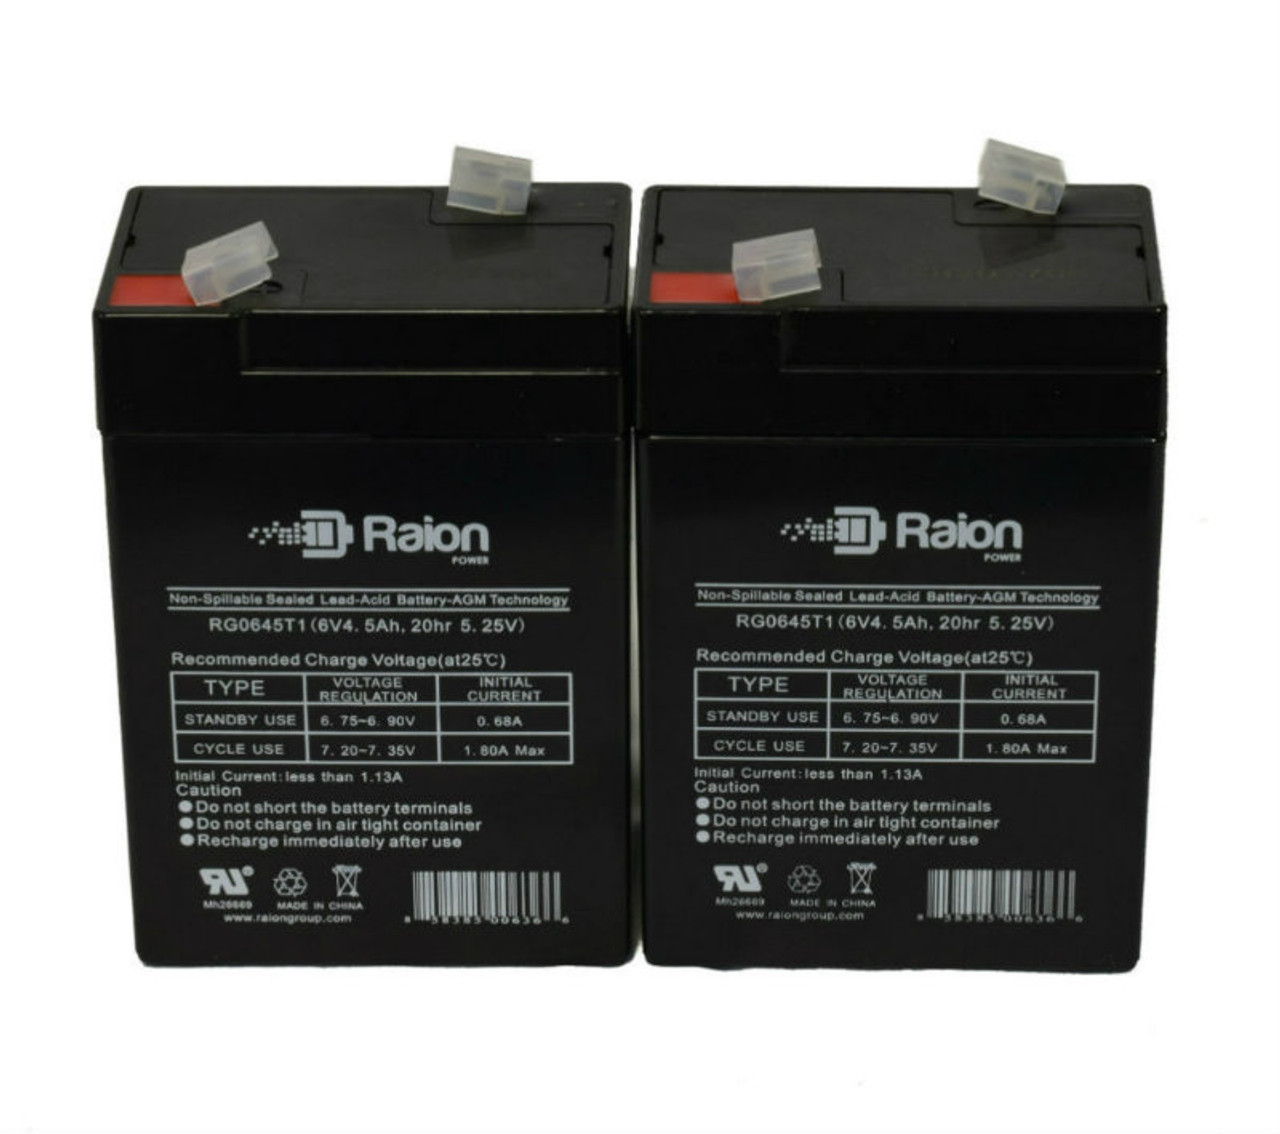 Raion Power 6V 4.5Ah Replacement Emergency Light Battery for GS Portalac PE46RF3CL - 2 Pack